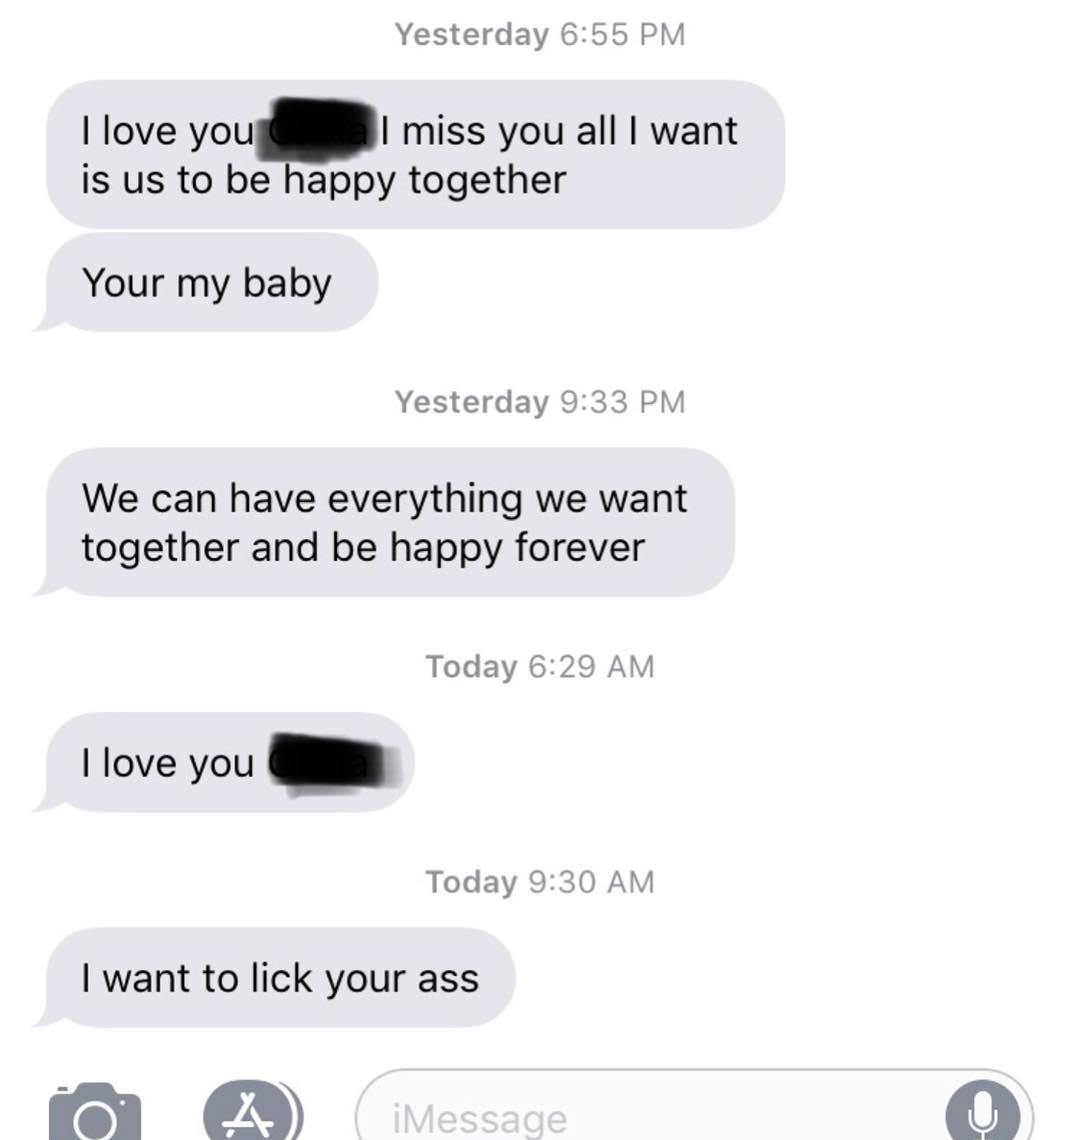 texts between lovers - Yesterday I love you I miss you all I want is us to be happy together Your my baby Yesterday We can have everything we want together and be happy forever Today I love you Today I want to lick your ass iMessage